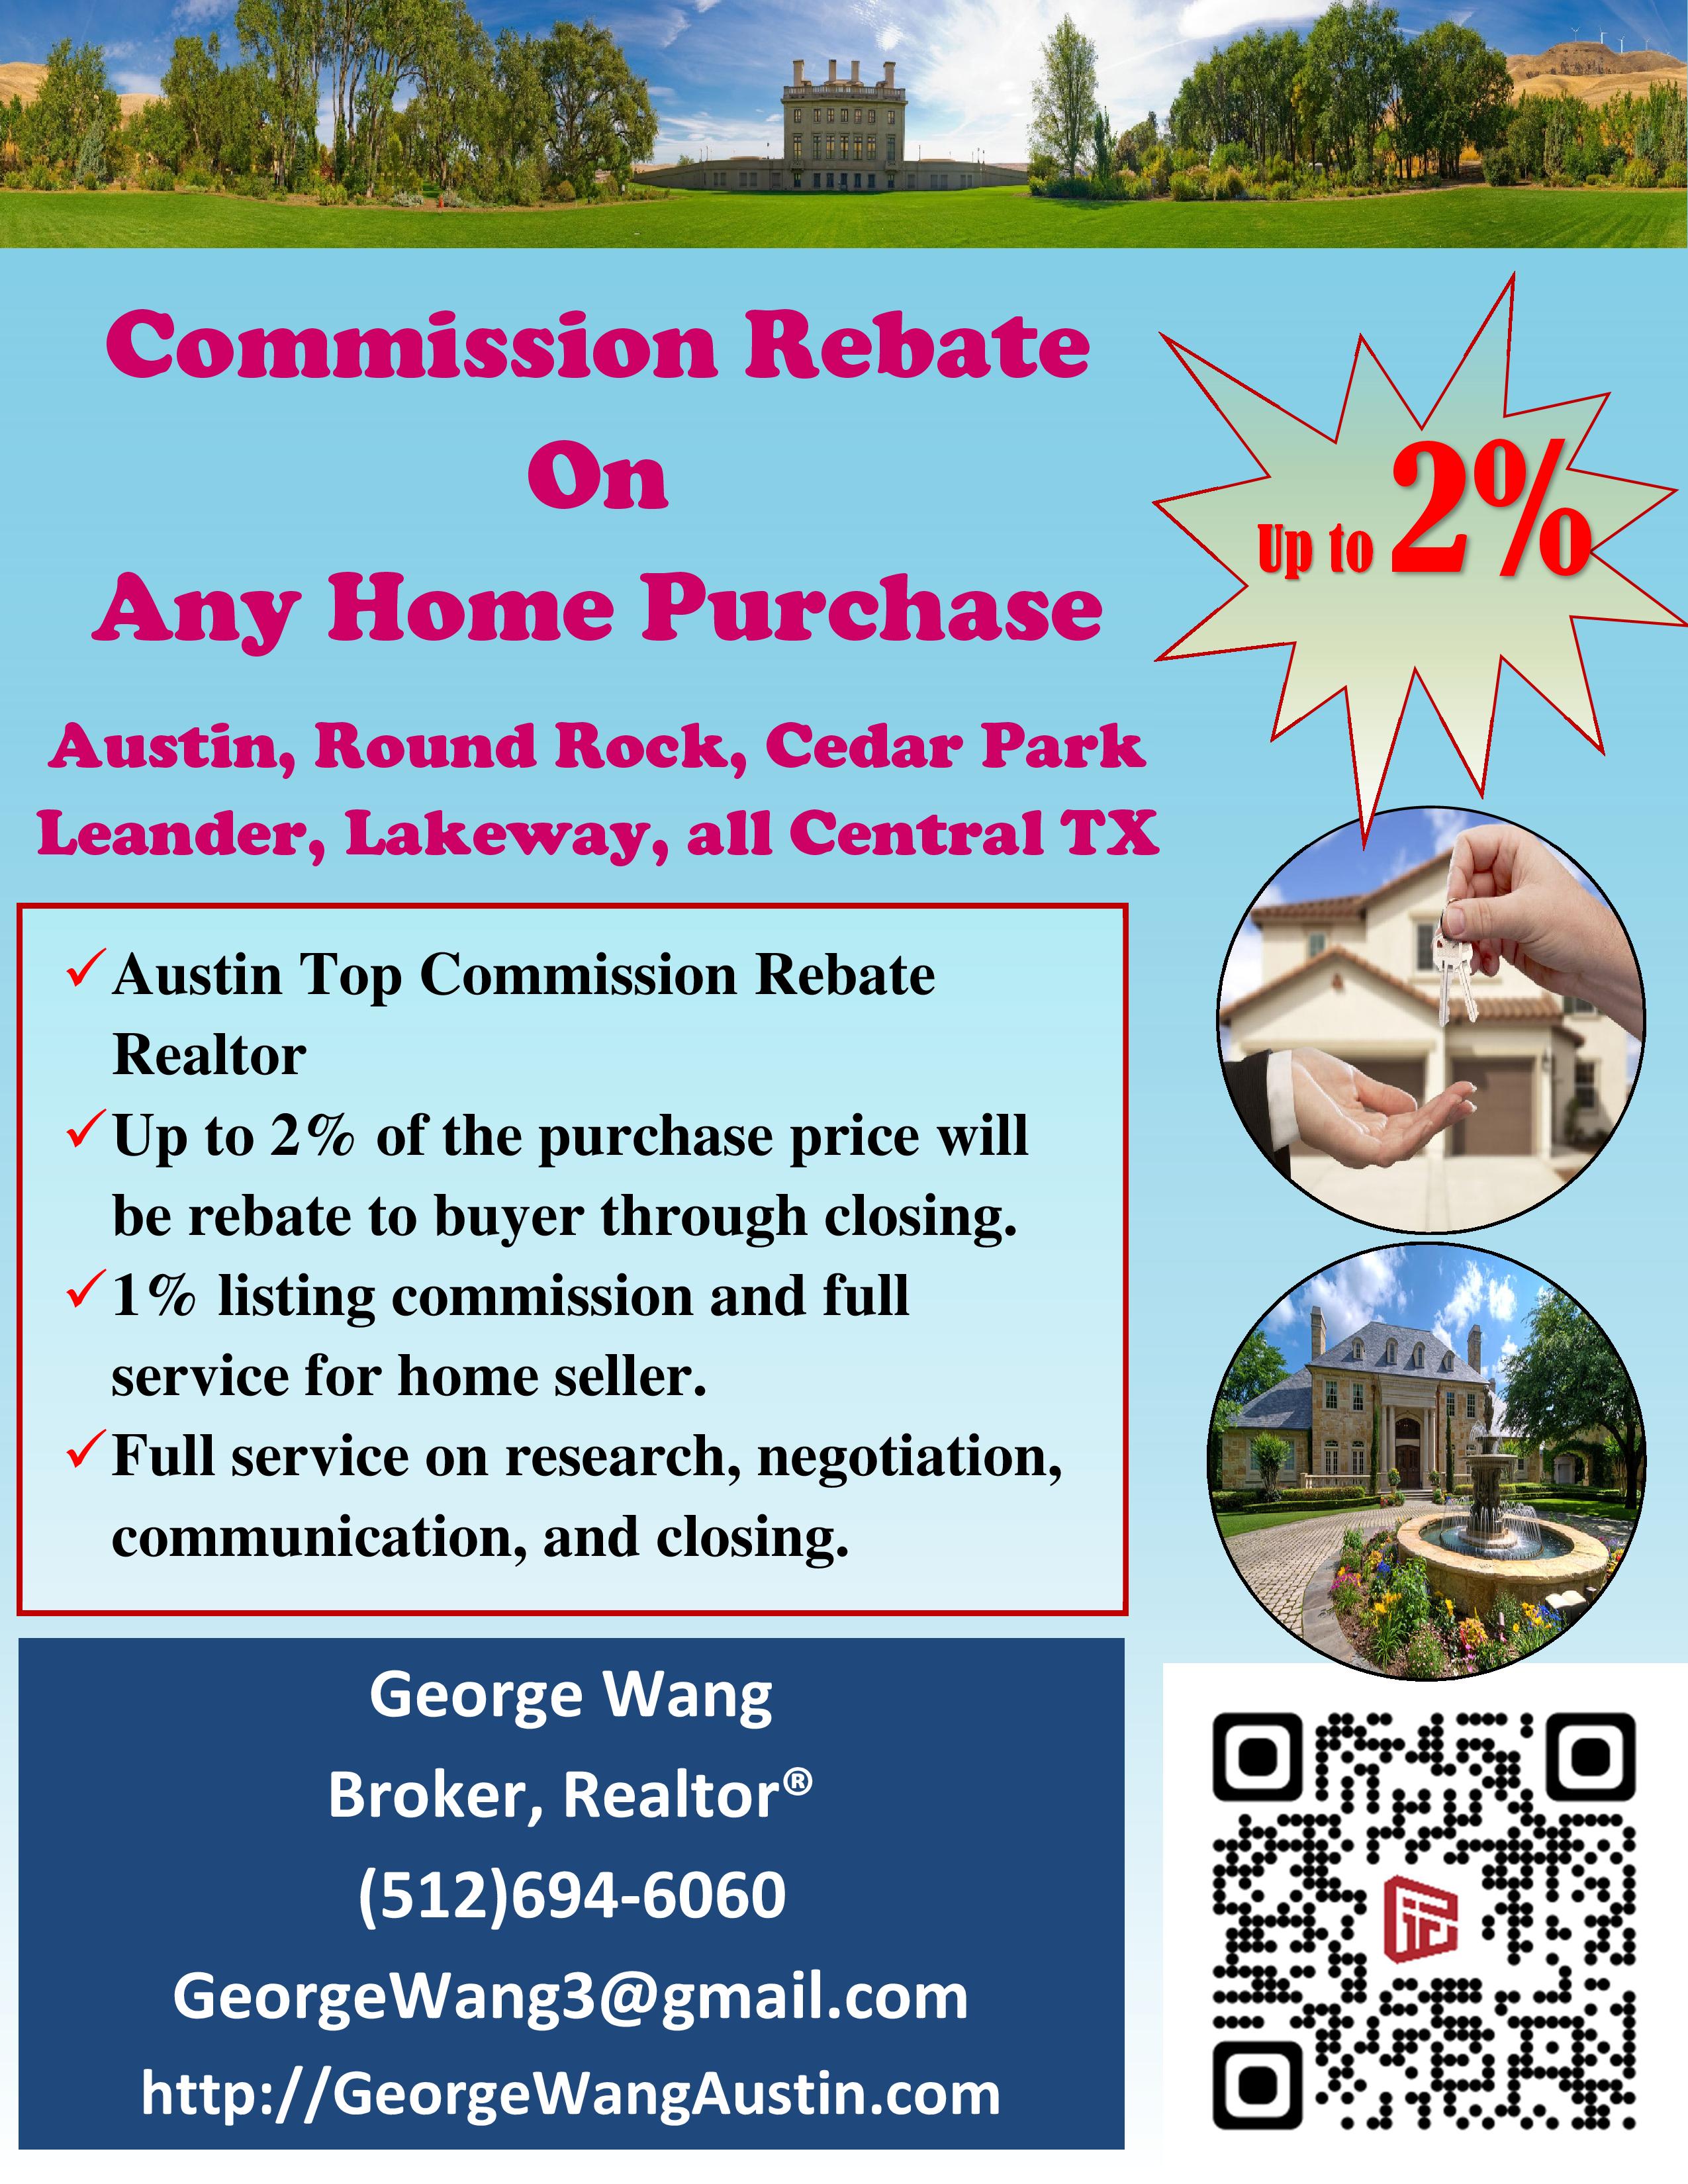 austin-top-commission-rebate-realtor-agent-fluent-in-english-and